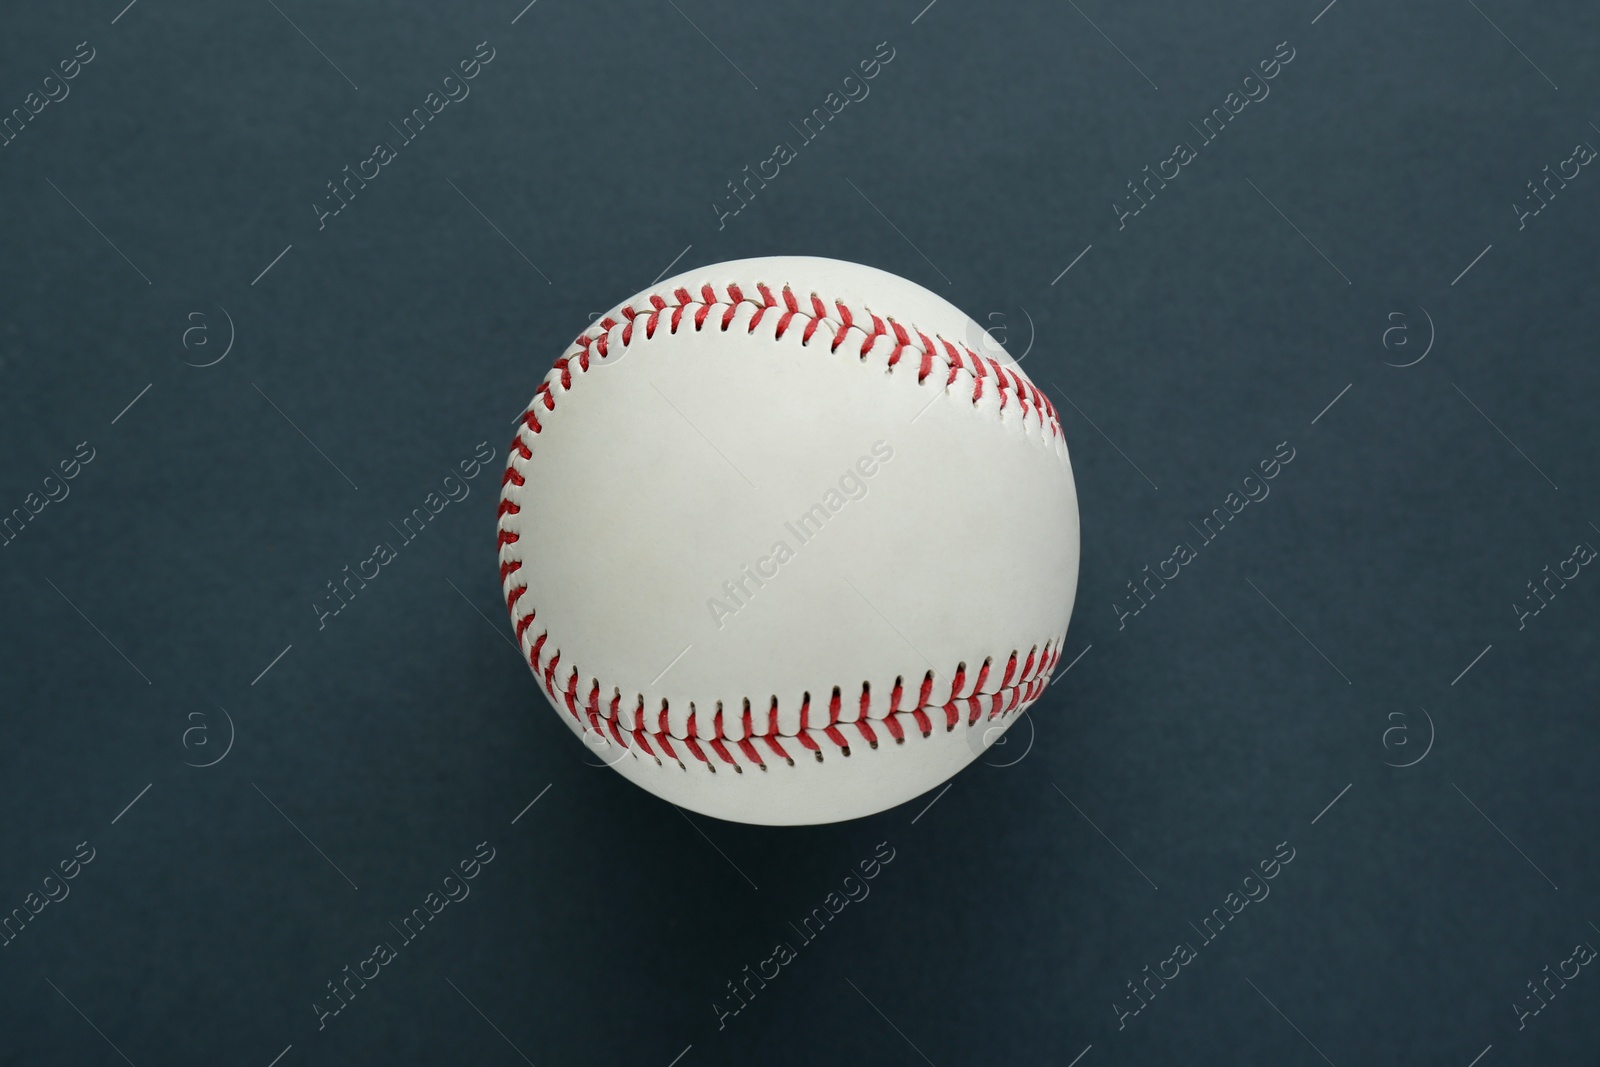 Photo of Baseball ball on dark background, top view. Sports game